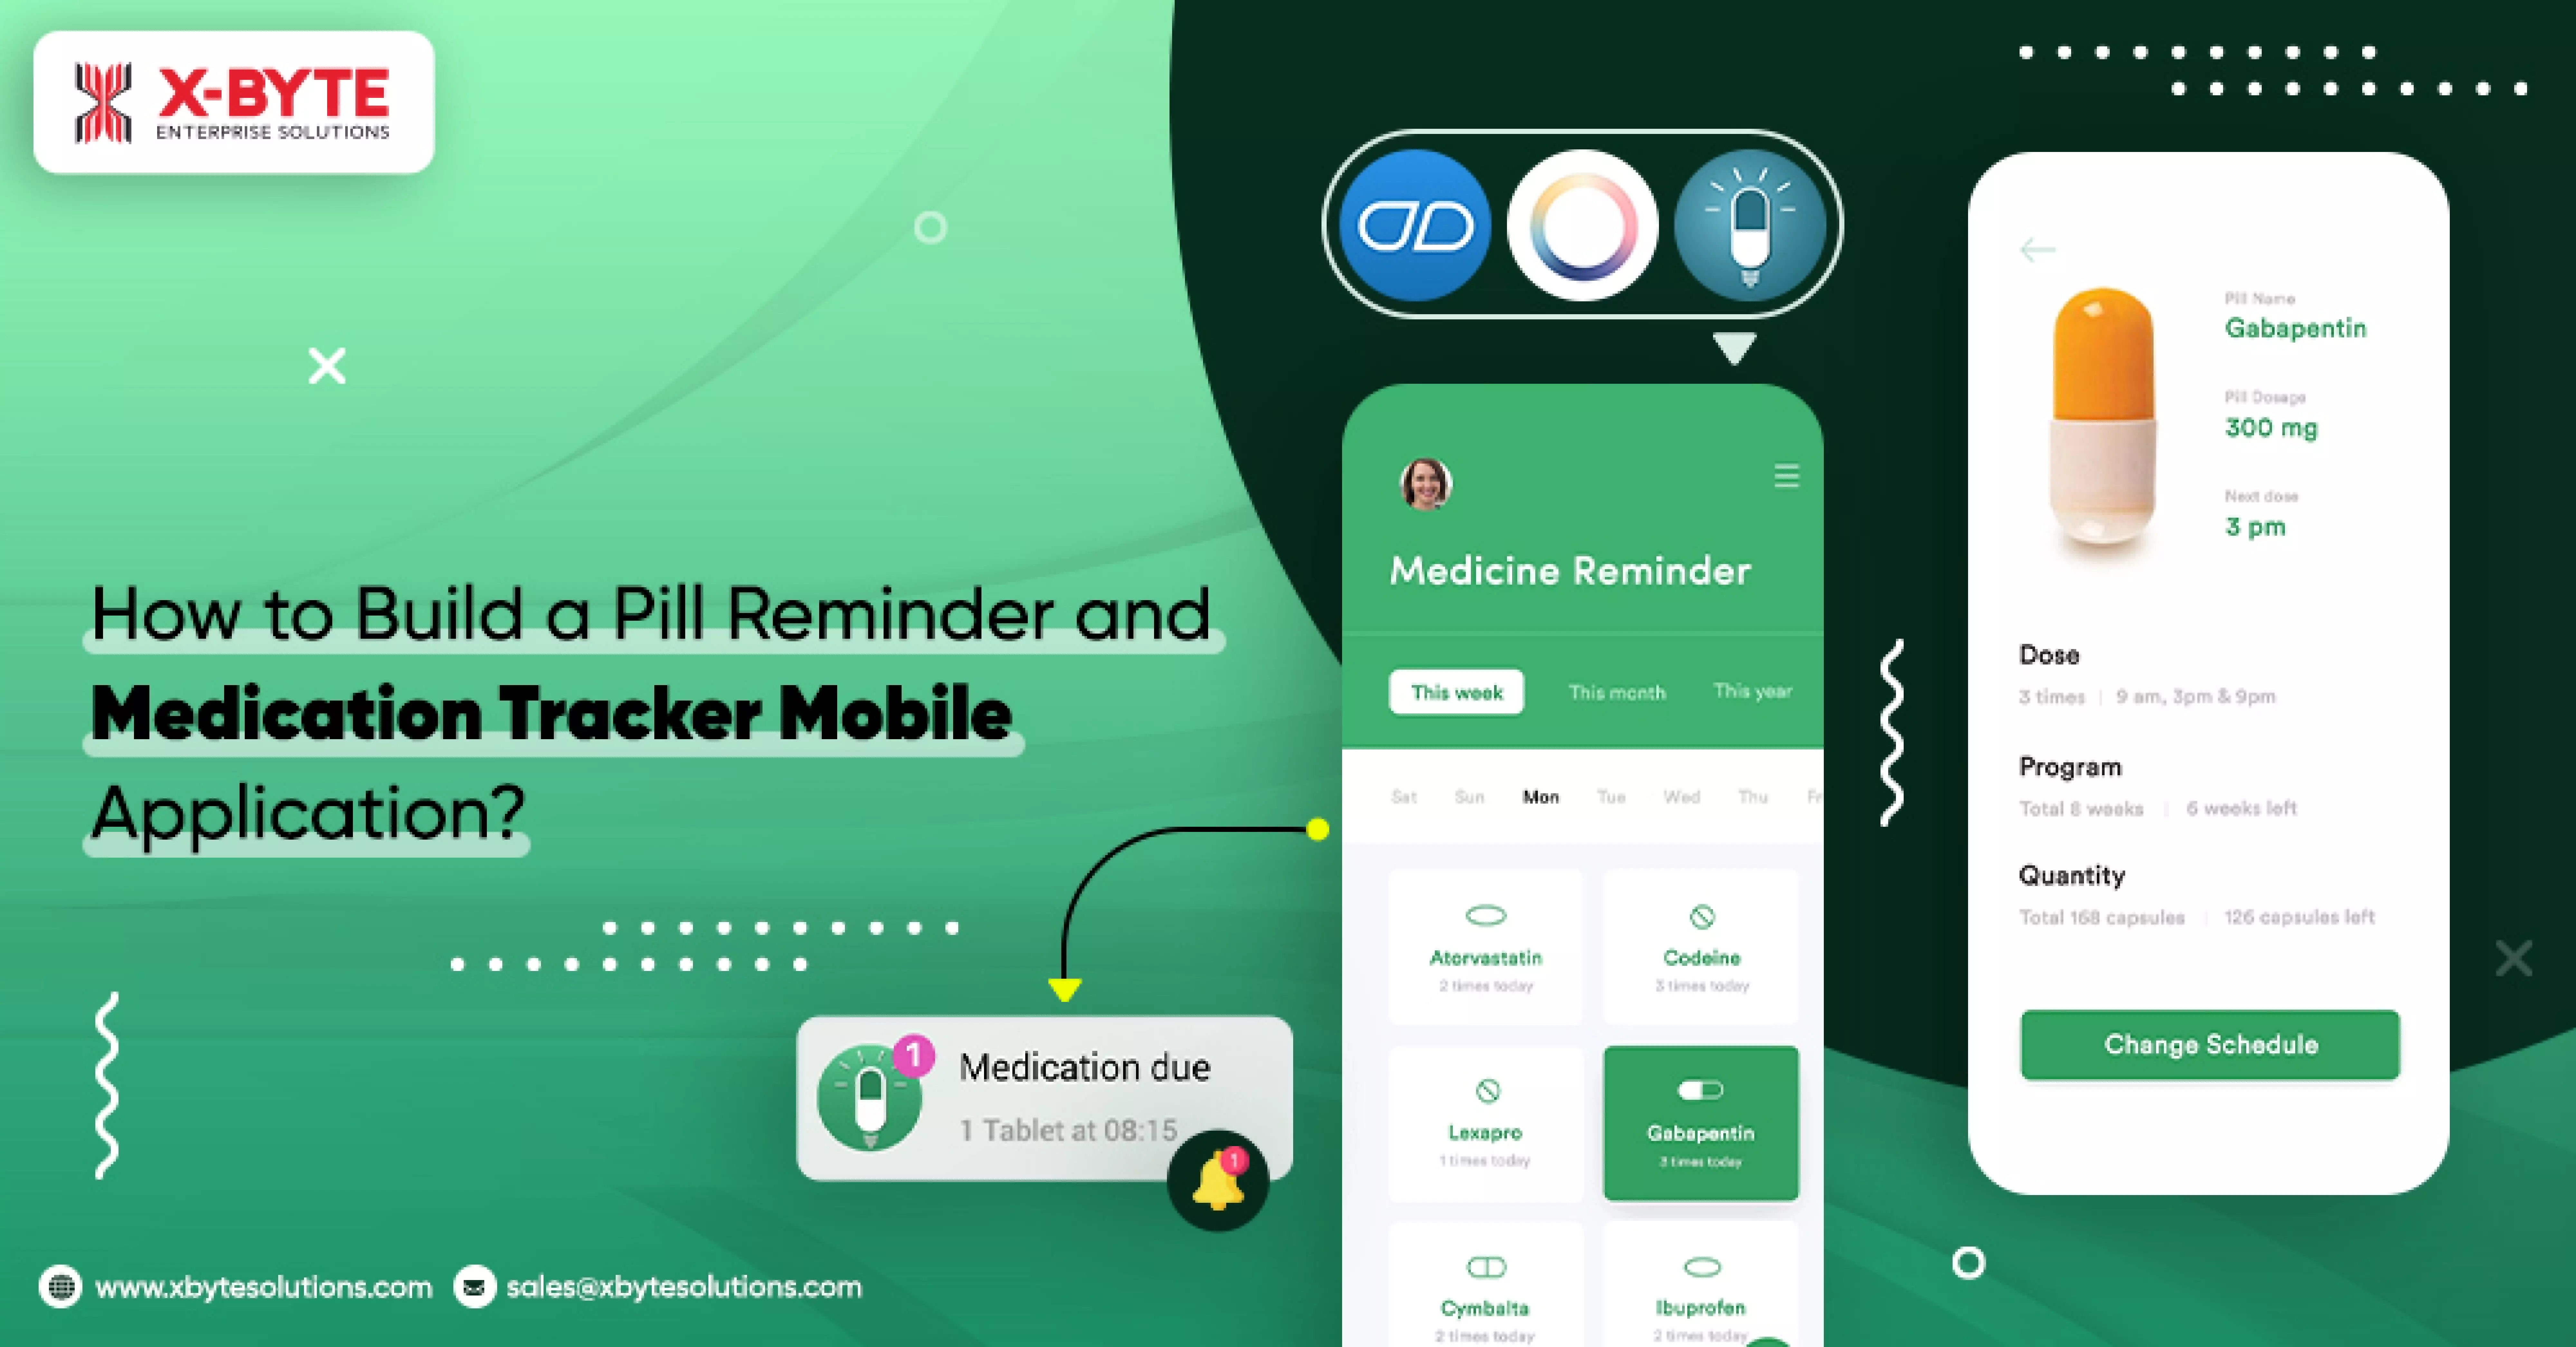 How to build a Pill Reminder and Medication Tracker Mobile Application